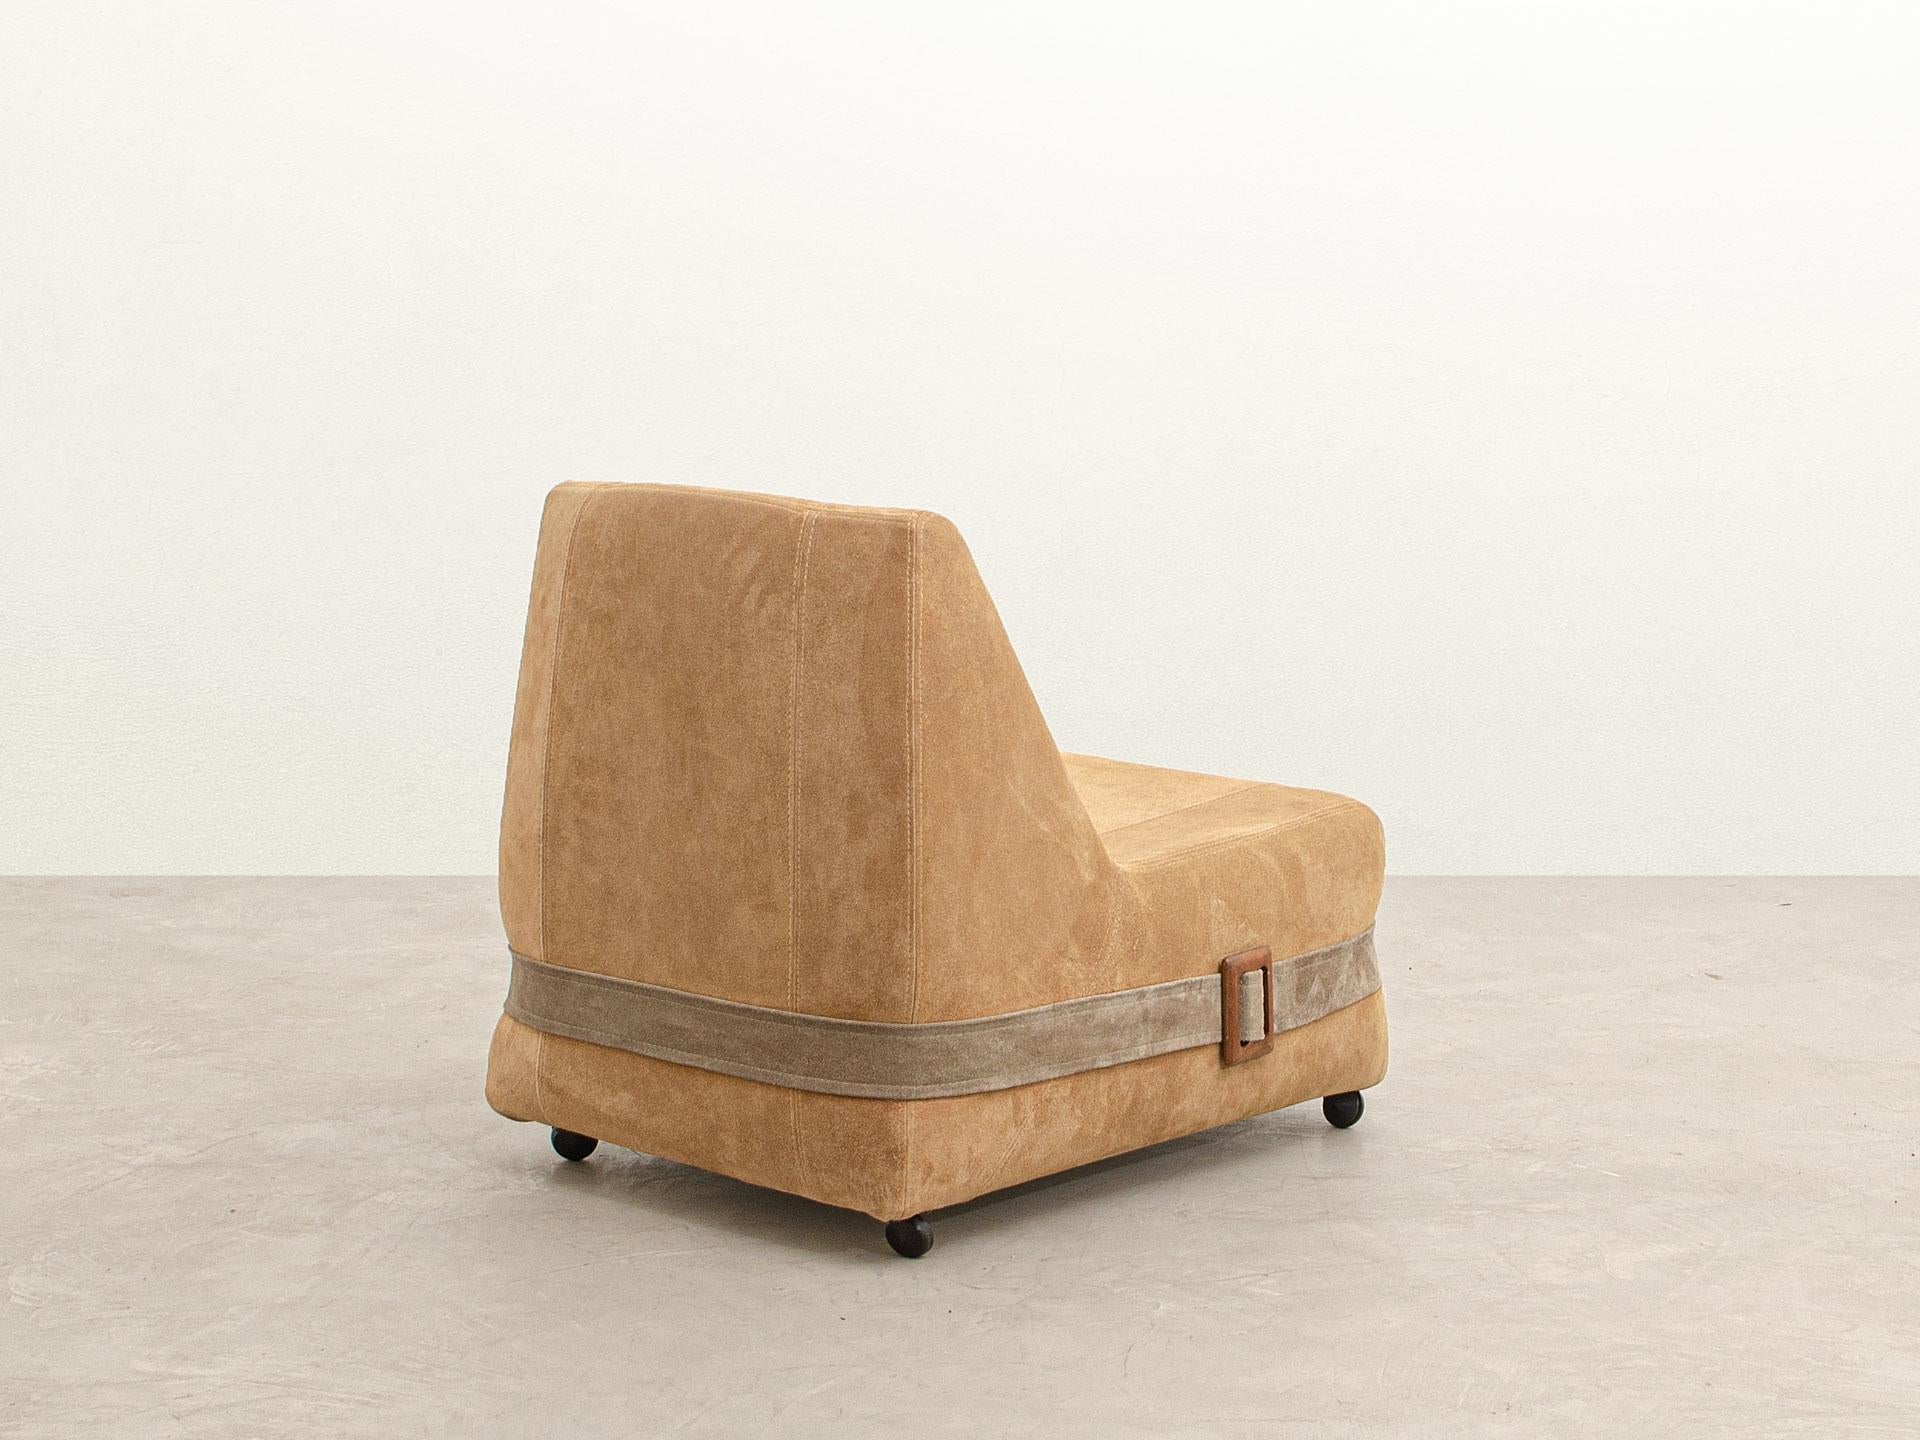 Fabric Rare MP-75 Lounge Chair, by Percival Lafer, Brazilian Mid-Century Modern